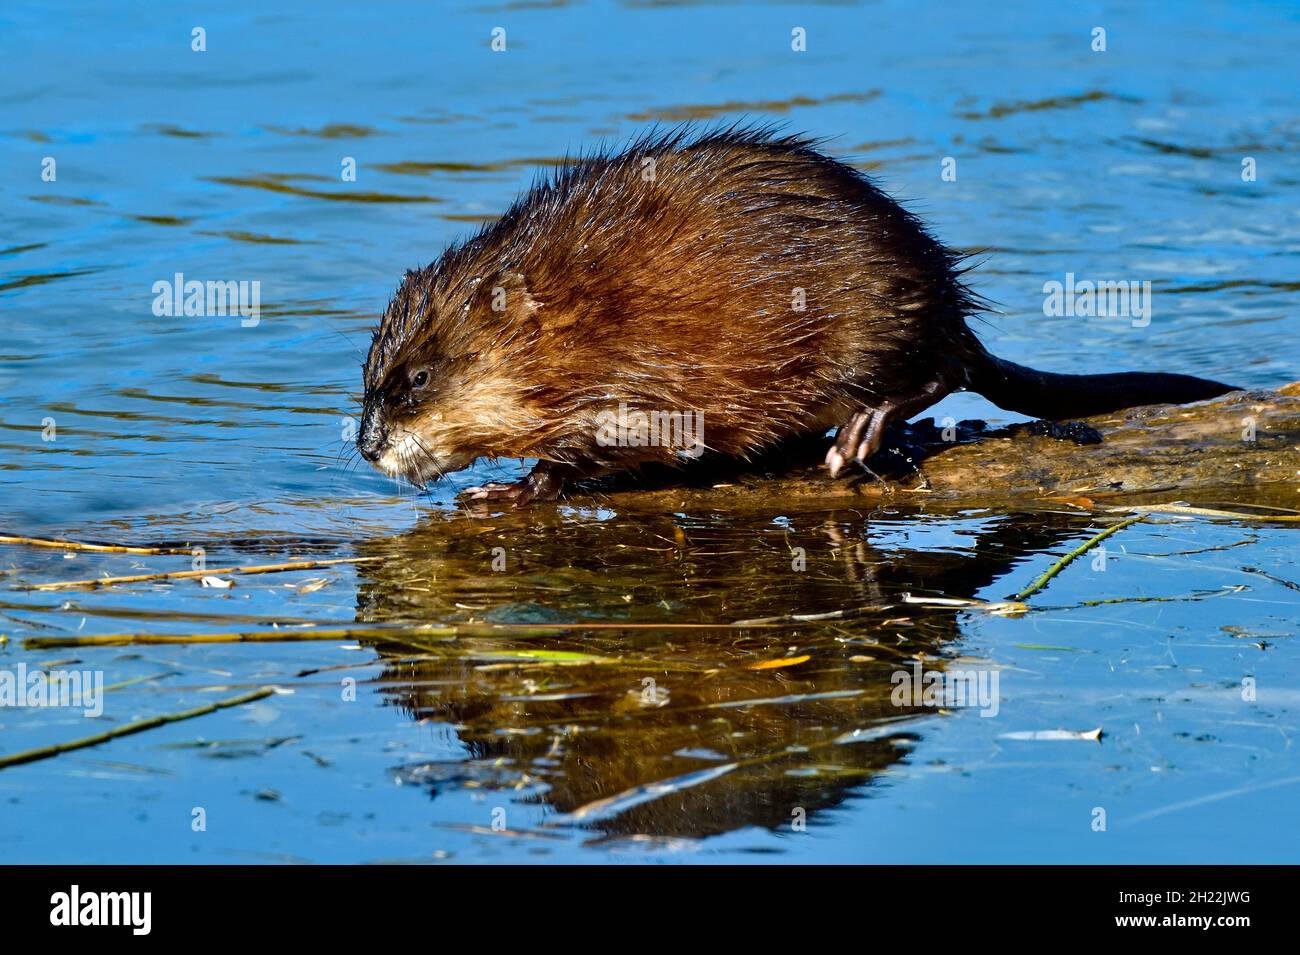 A side view of a wild Muskrat " Ondatra zibethicus" walking on a sunken tree in a beaver pond in rural Alberta Canada Stock Photo